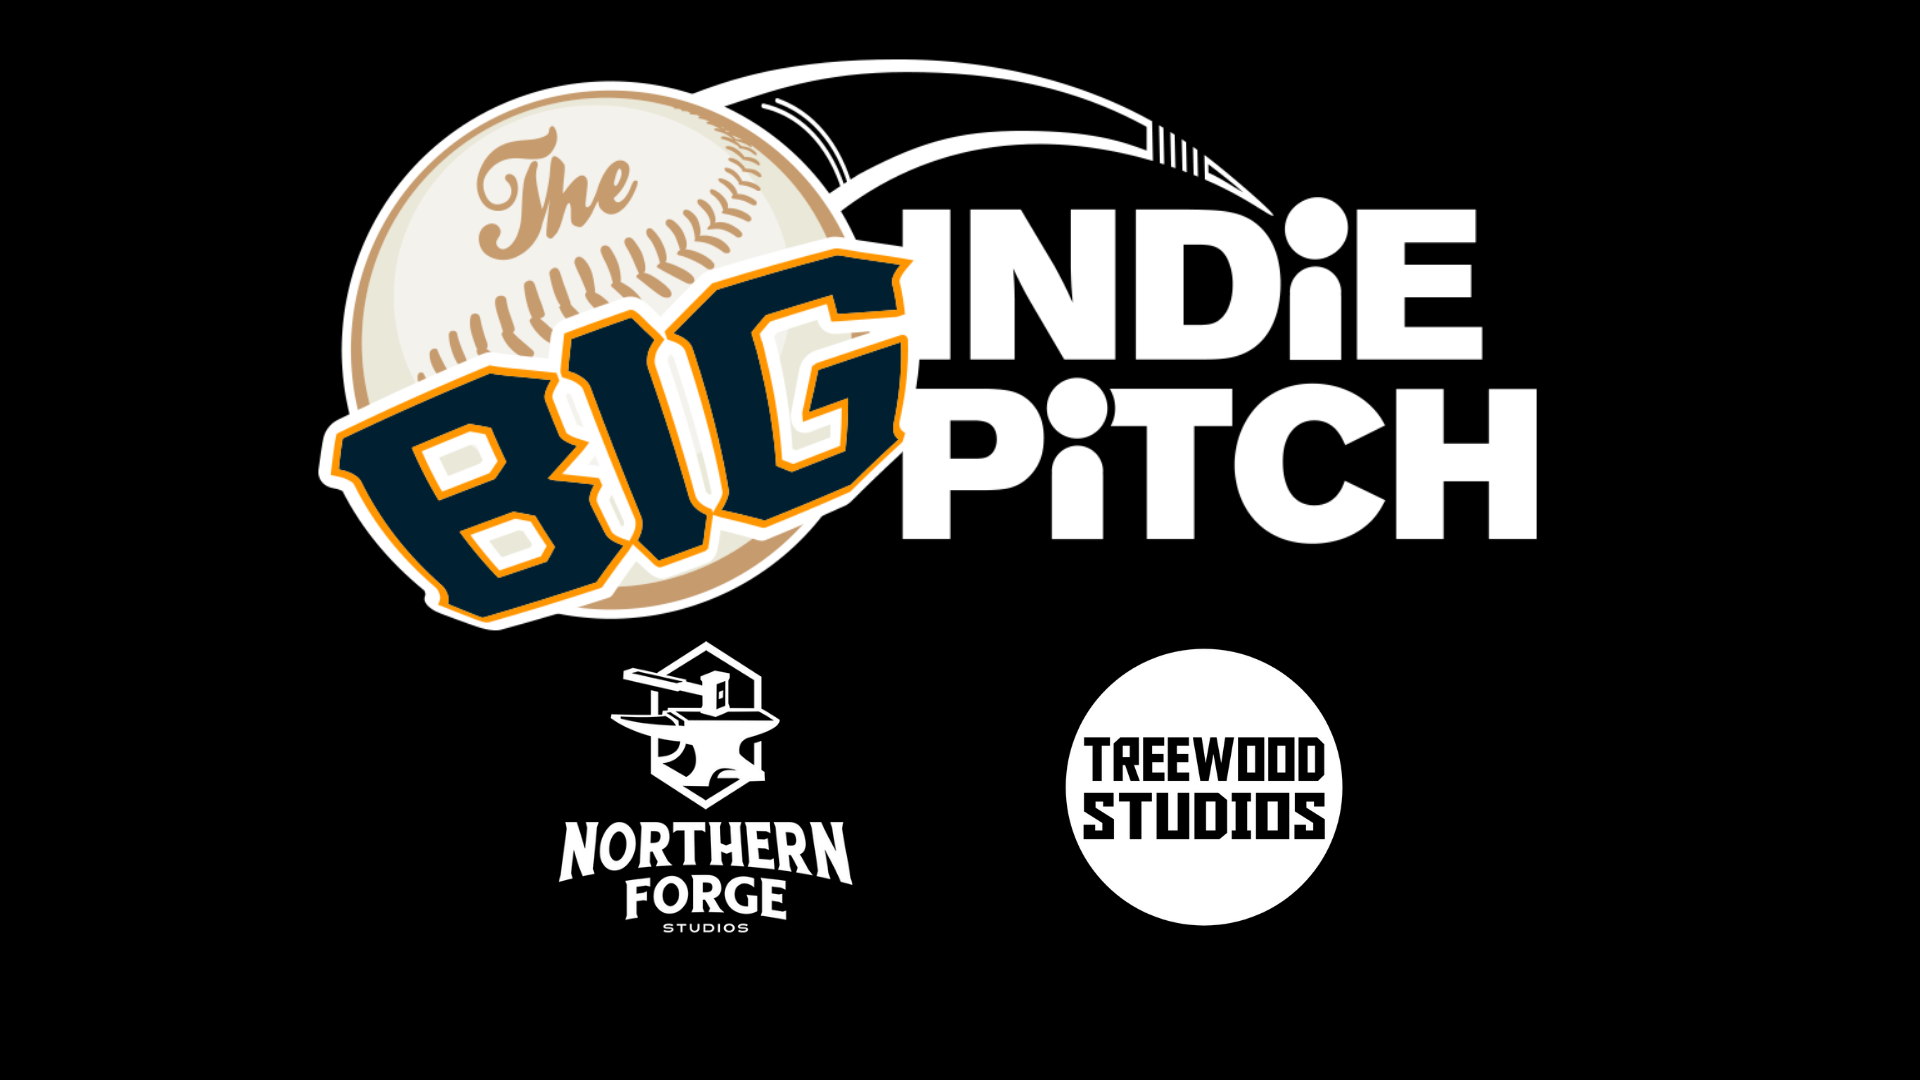 The Big indie Pitch